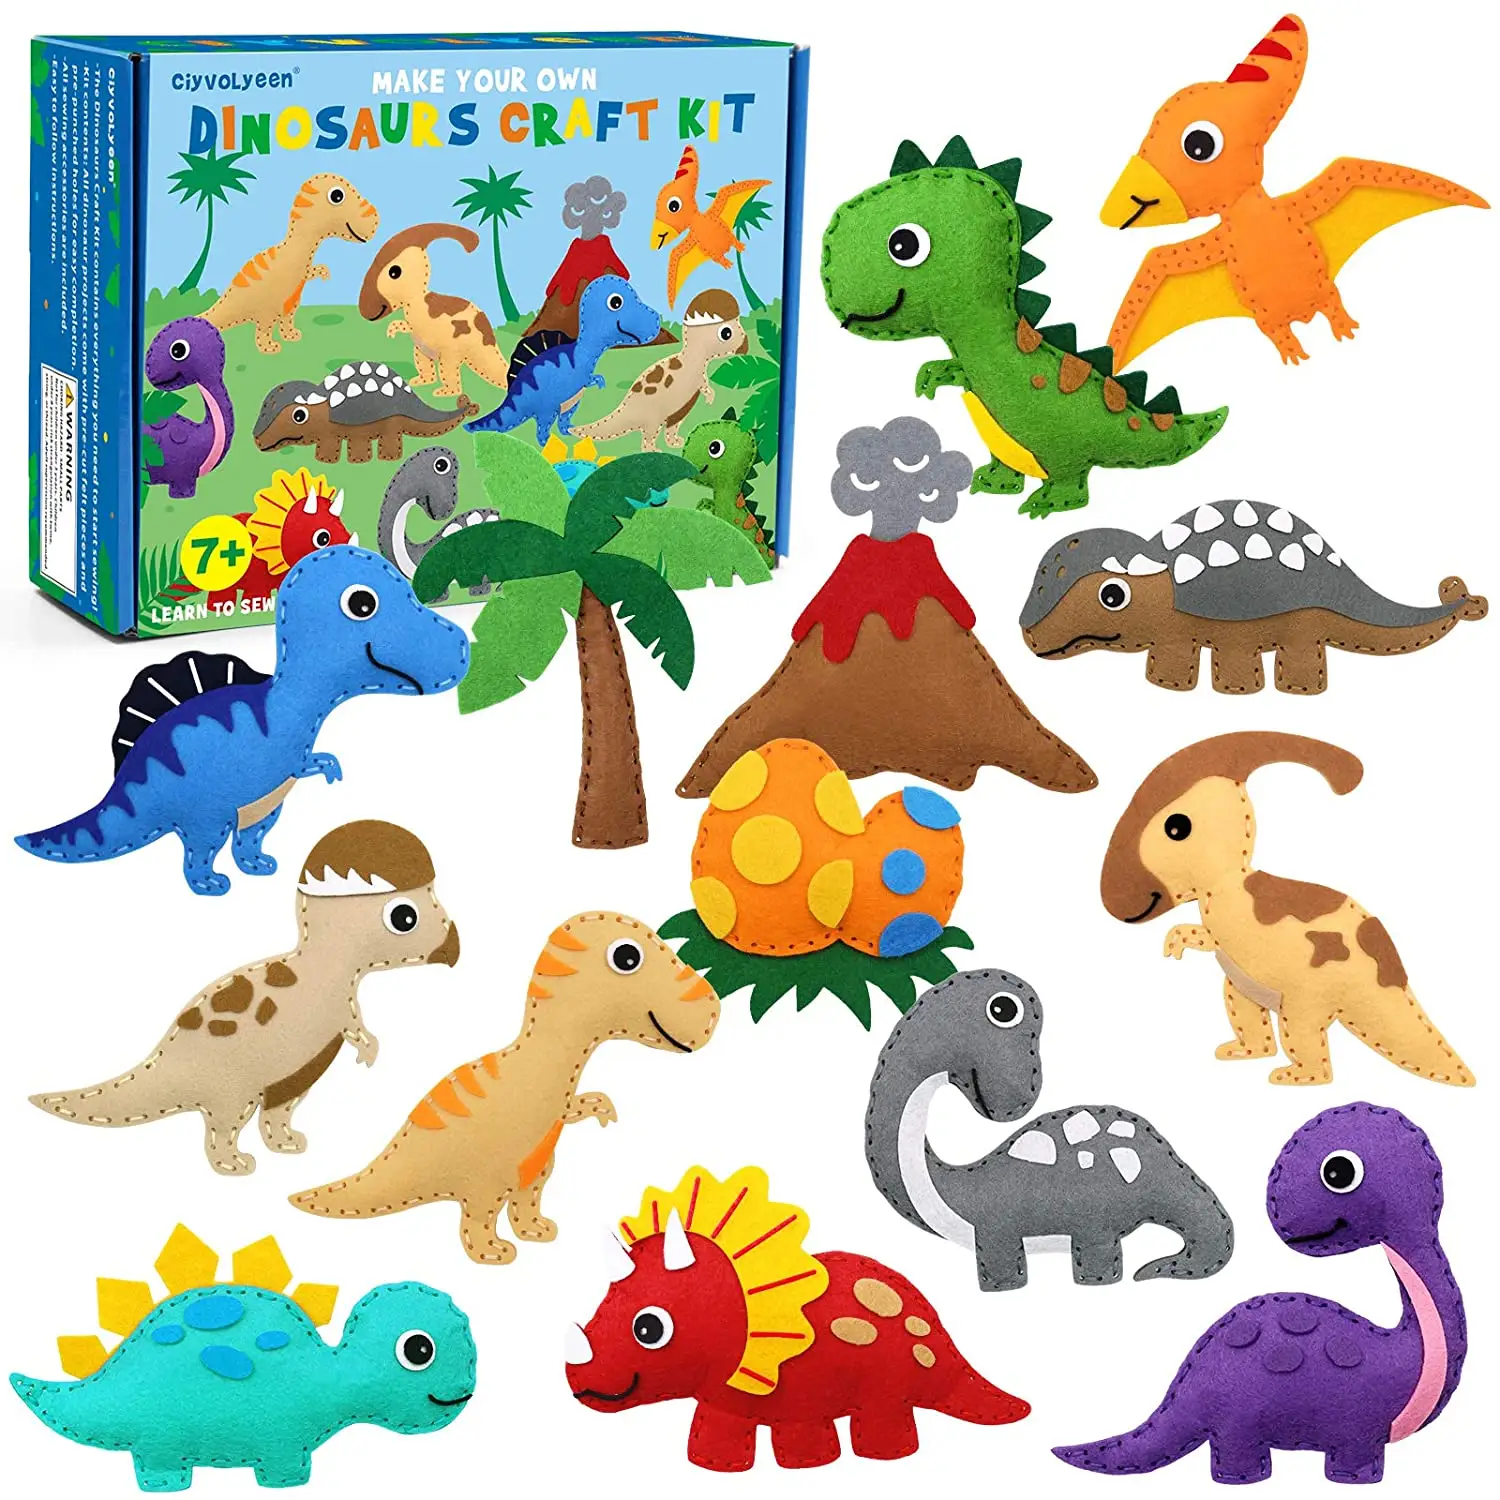 Animals Felt Plush Craft Kit Includes 14 Creative Projects to Sewing Beginners Fun DIY Educational Gift